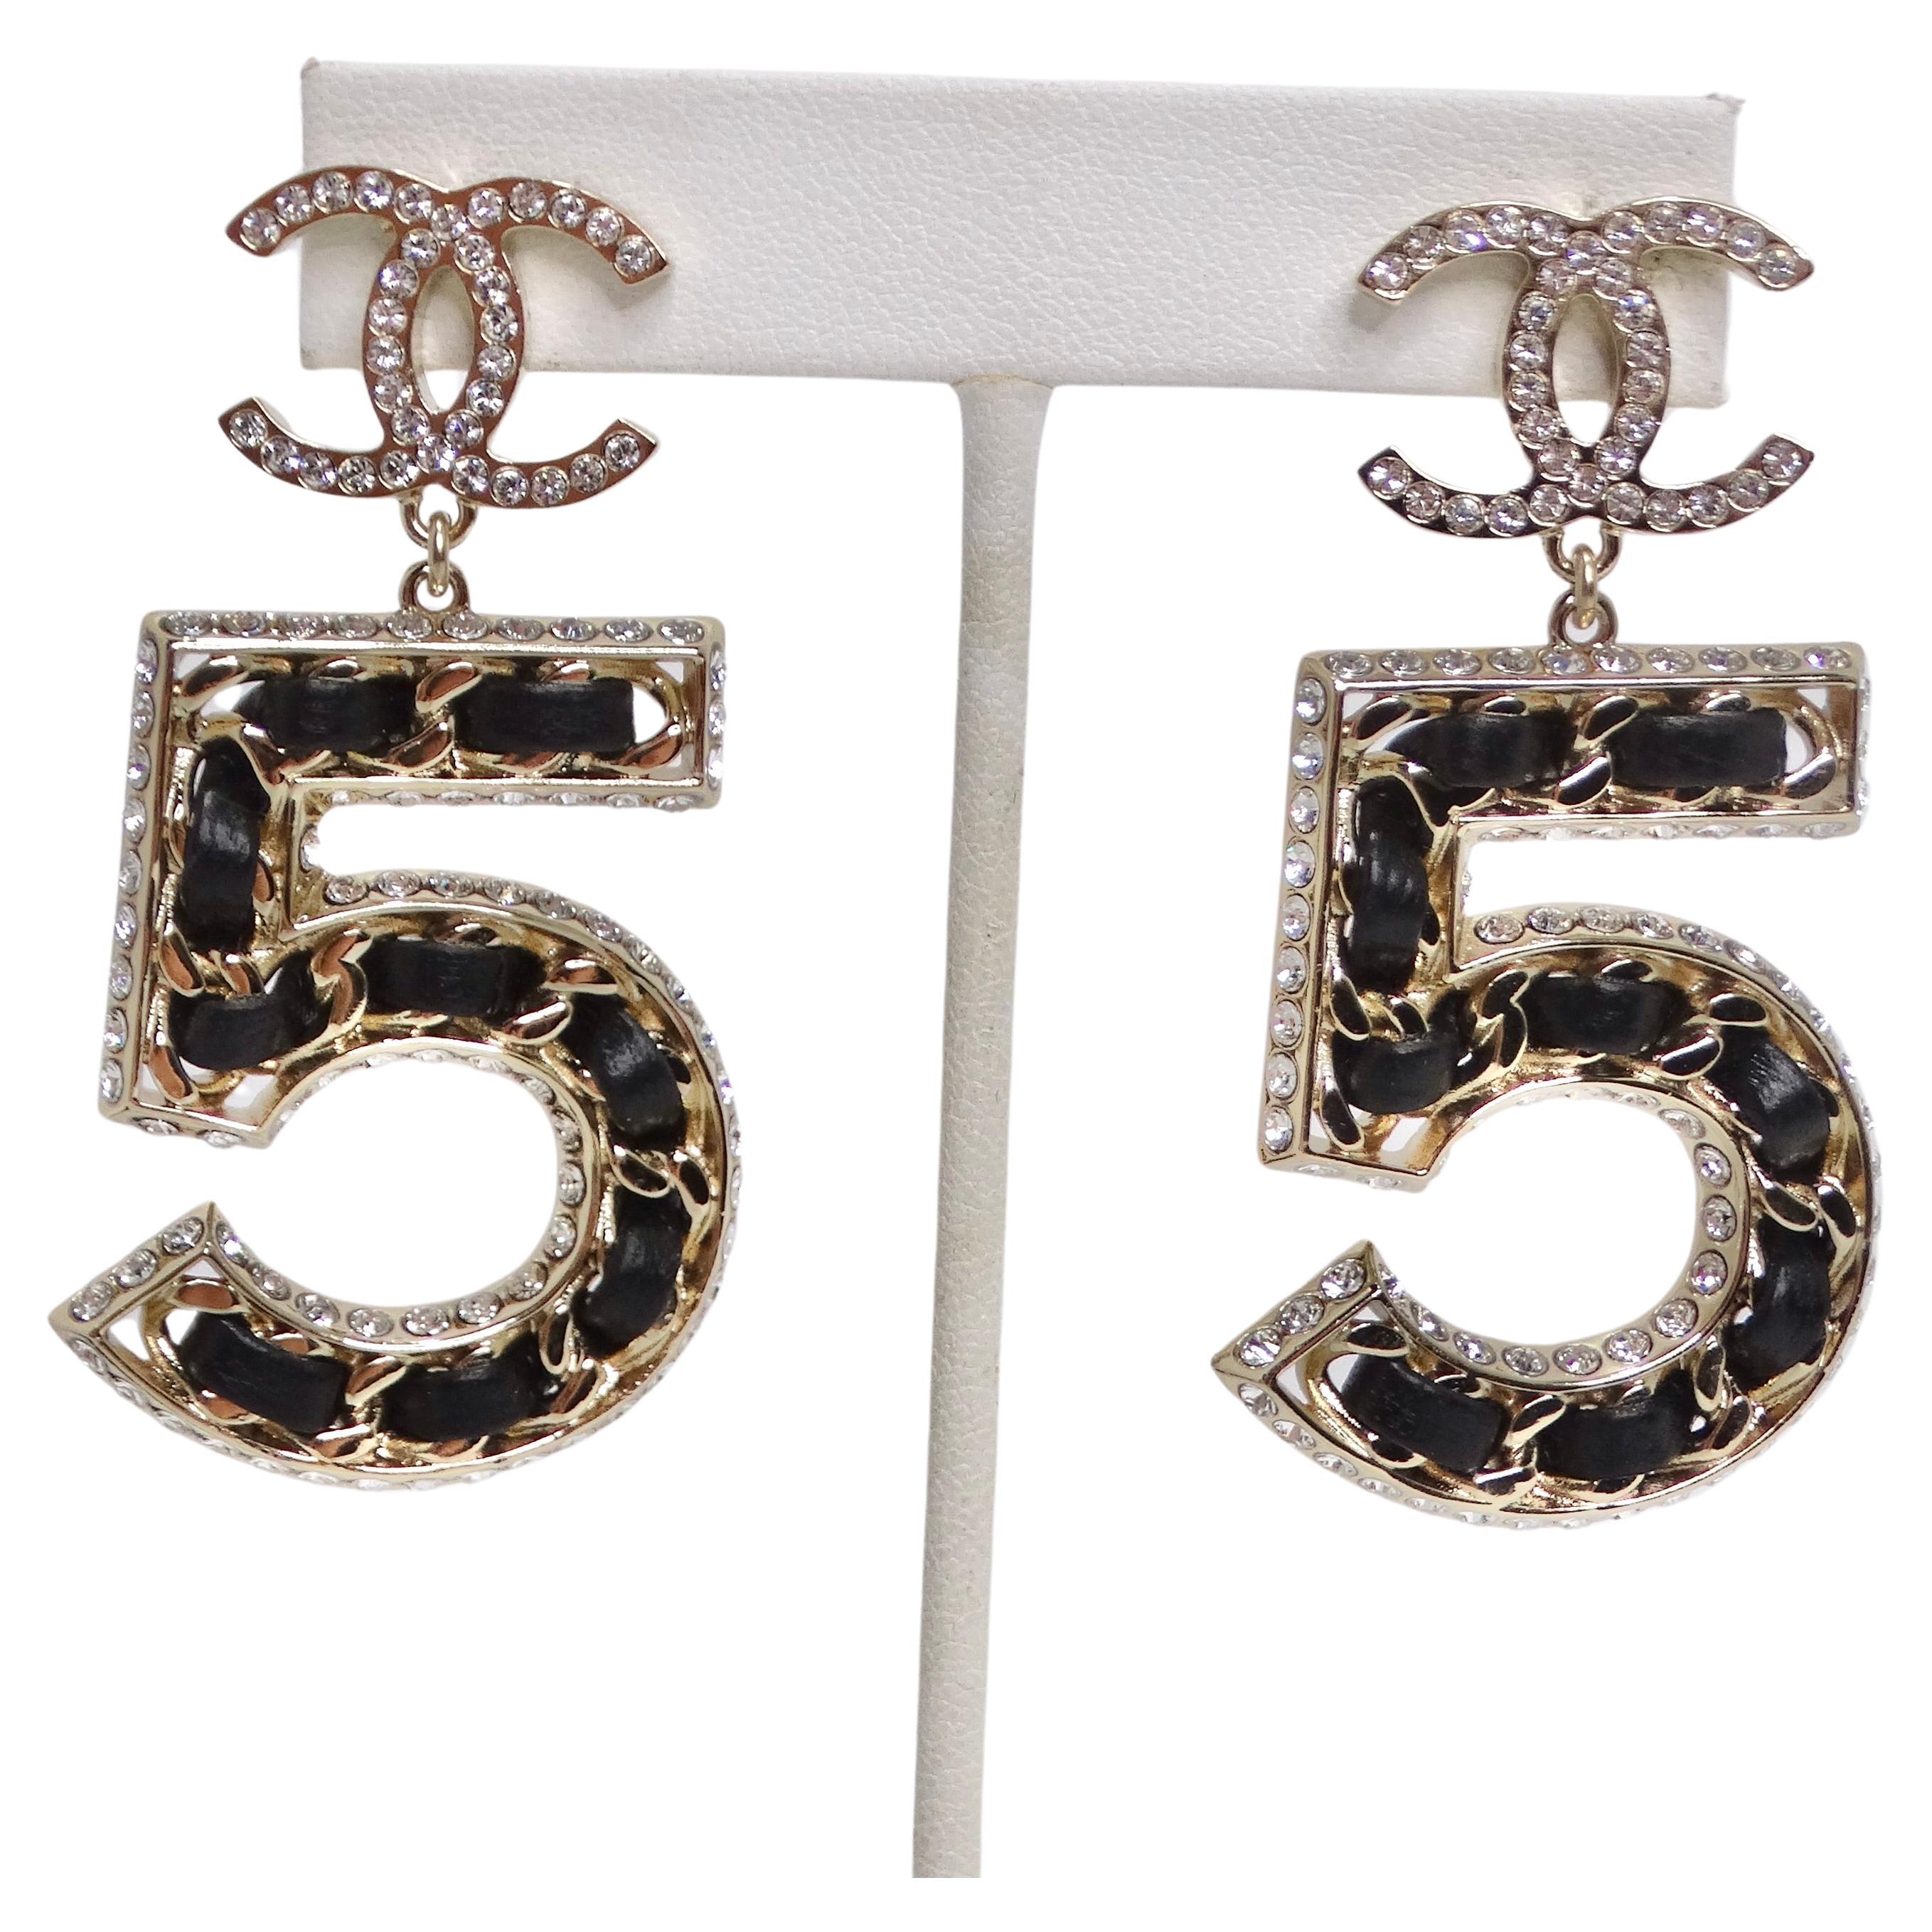 Introducing the Chanel 2023 Crystal Lambskin Chain CC No. 5 Drop Earrings, the epitome of luxury and sophistication! These exquisite earrings are the perfect accessory to elevate your style and make a bold fashion statement. These earrings feature